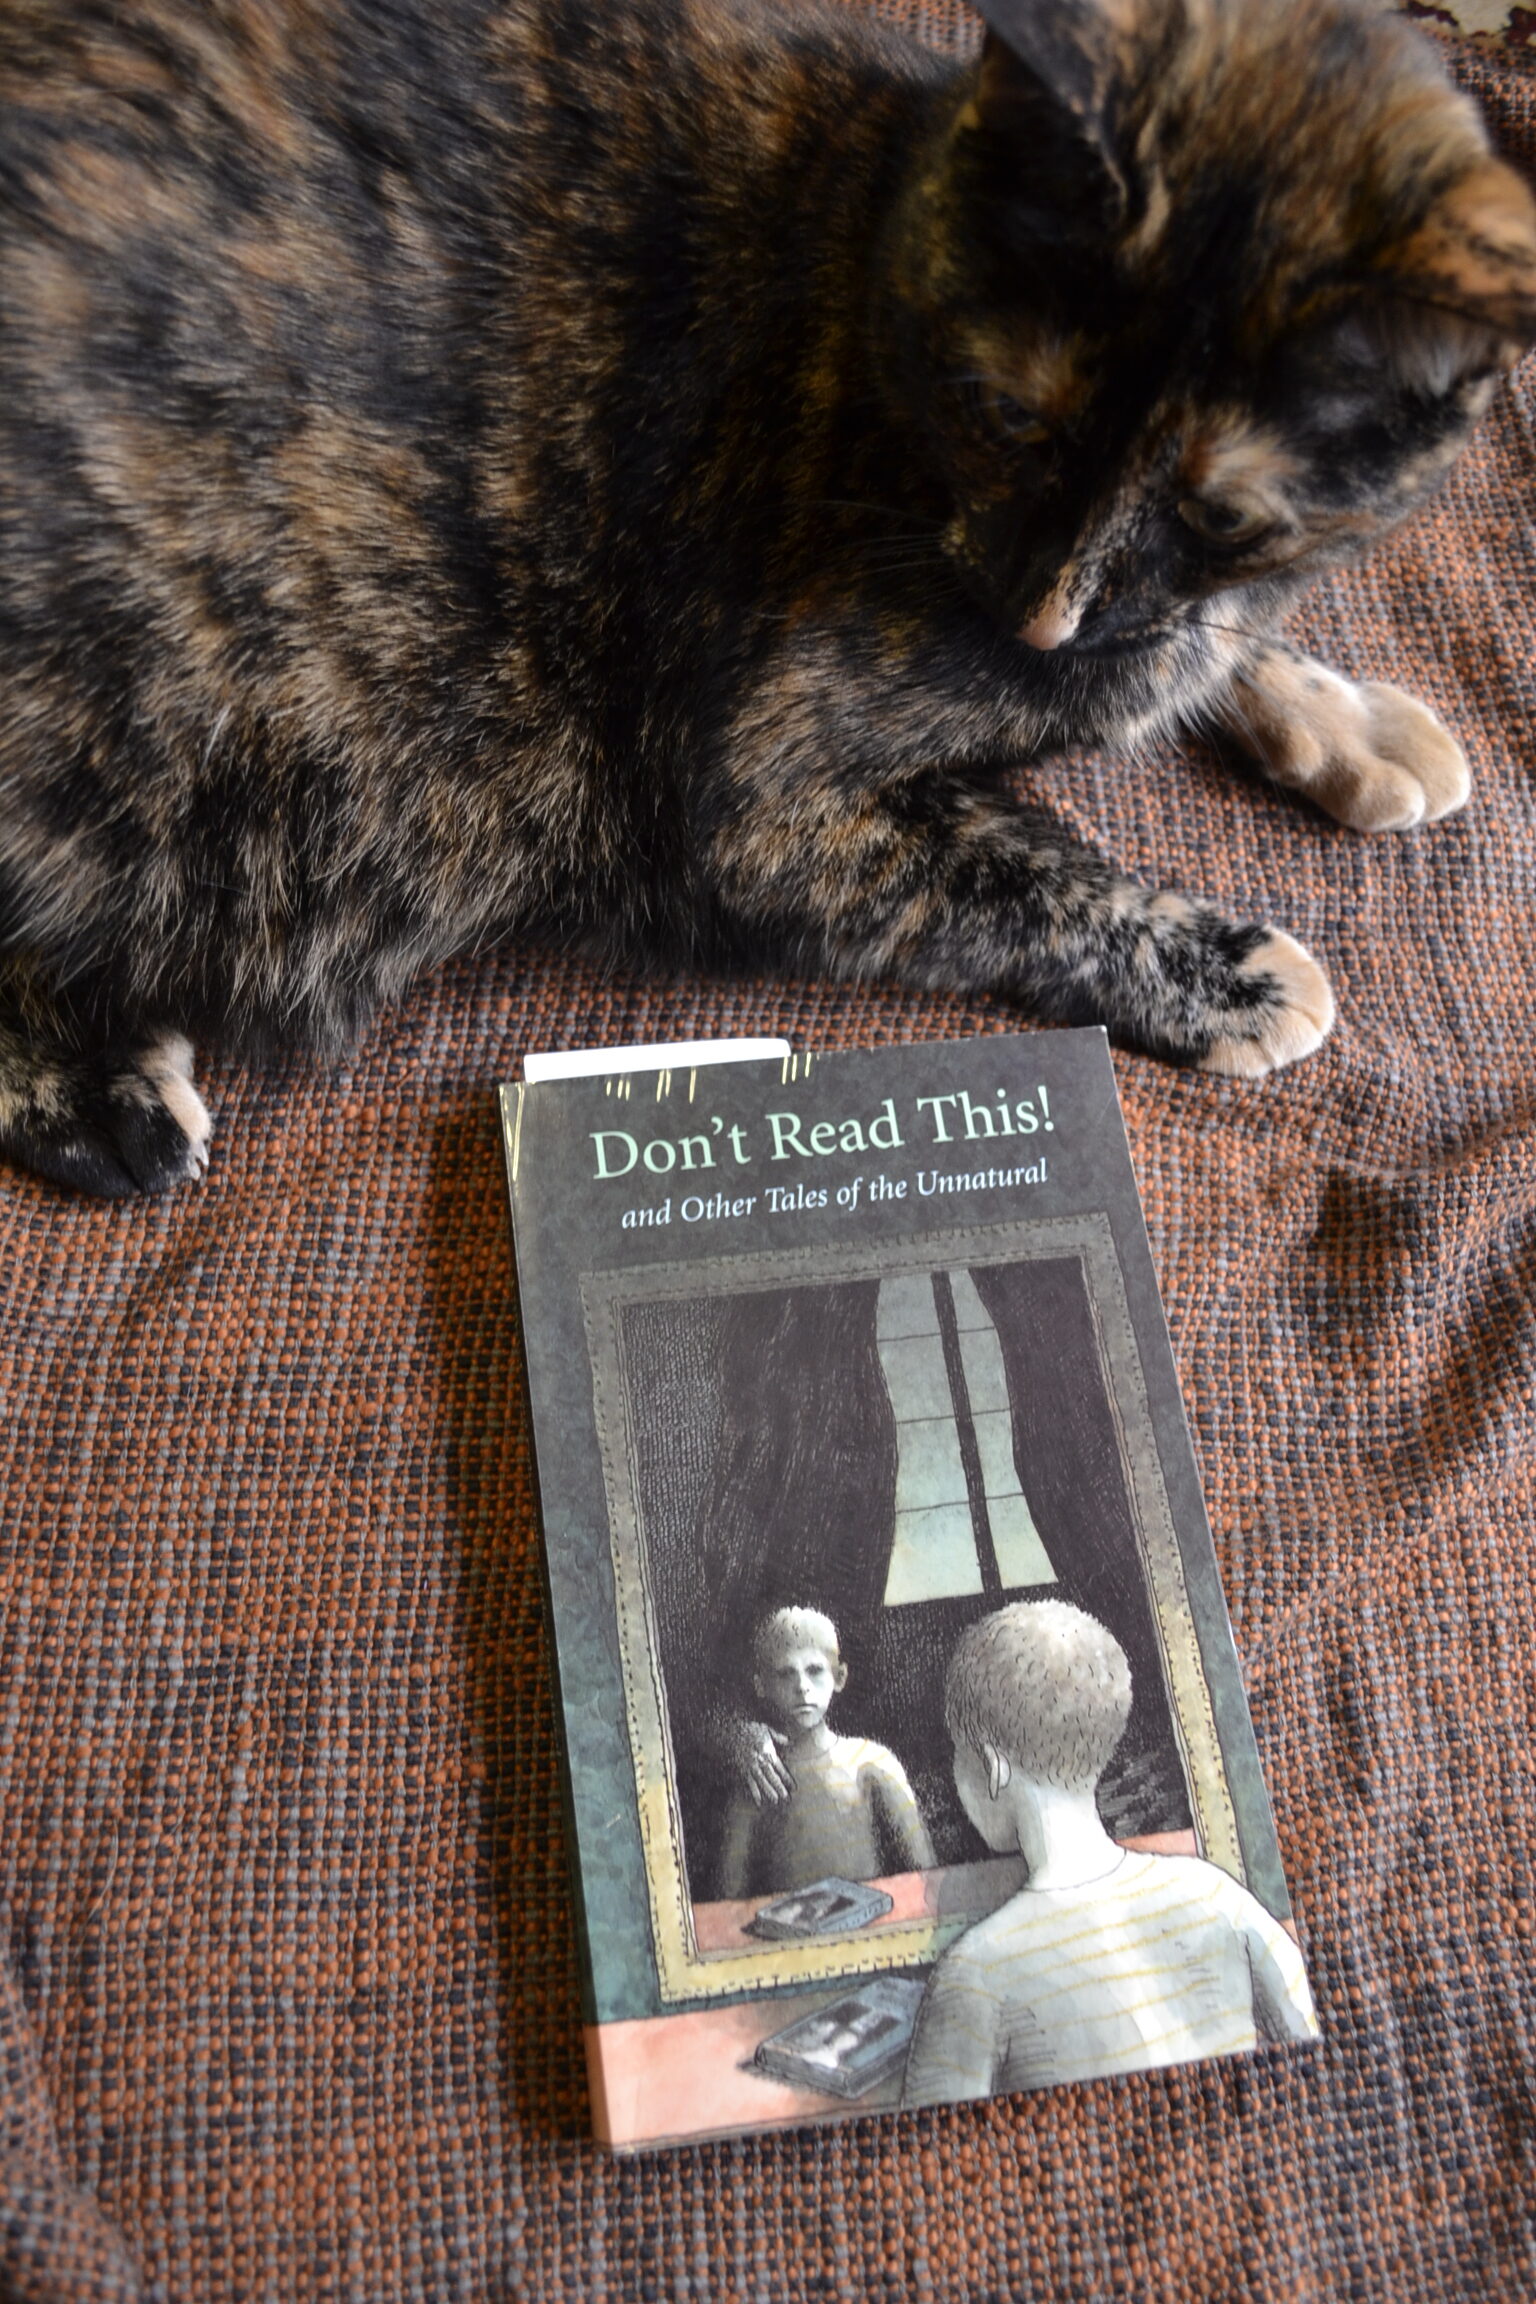 A tortoiseshell cat looks at a book titled Don't Read This!